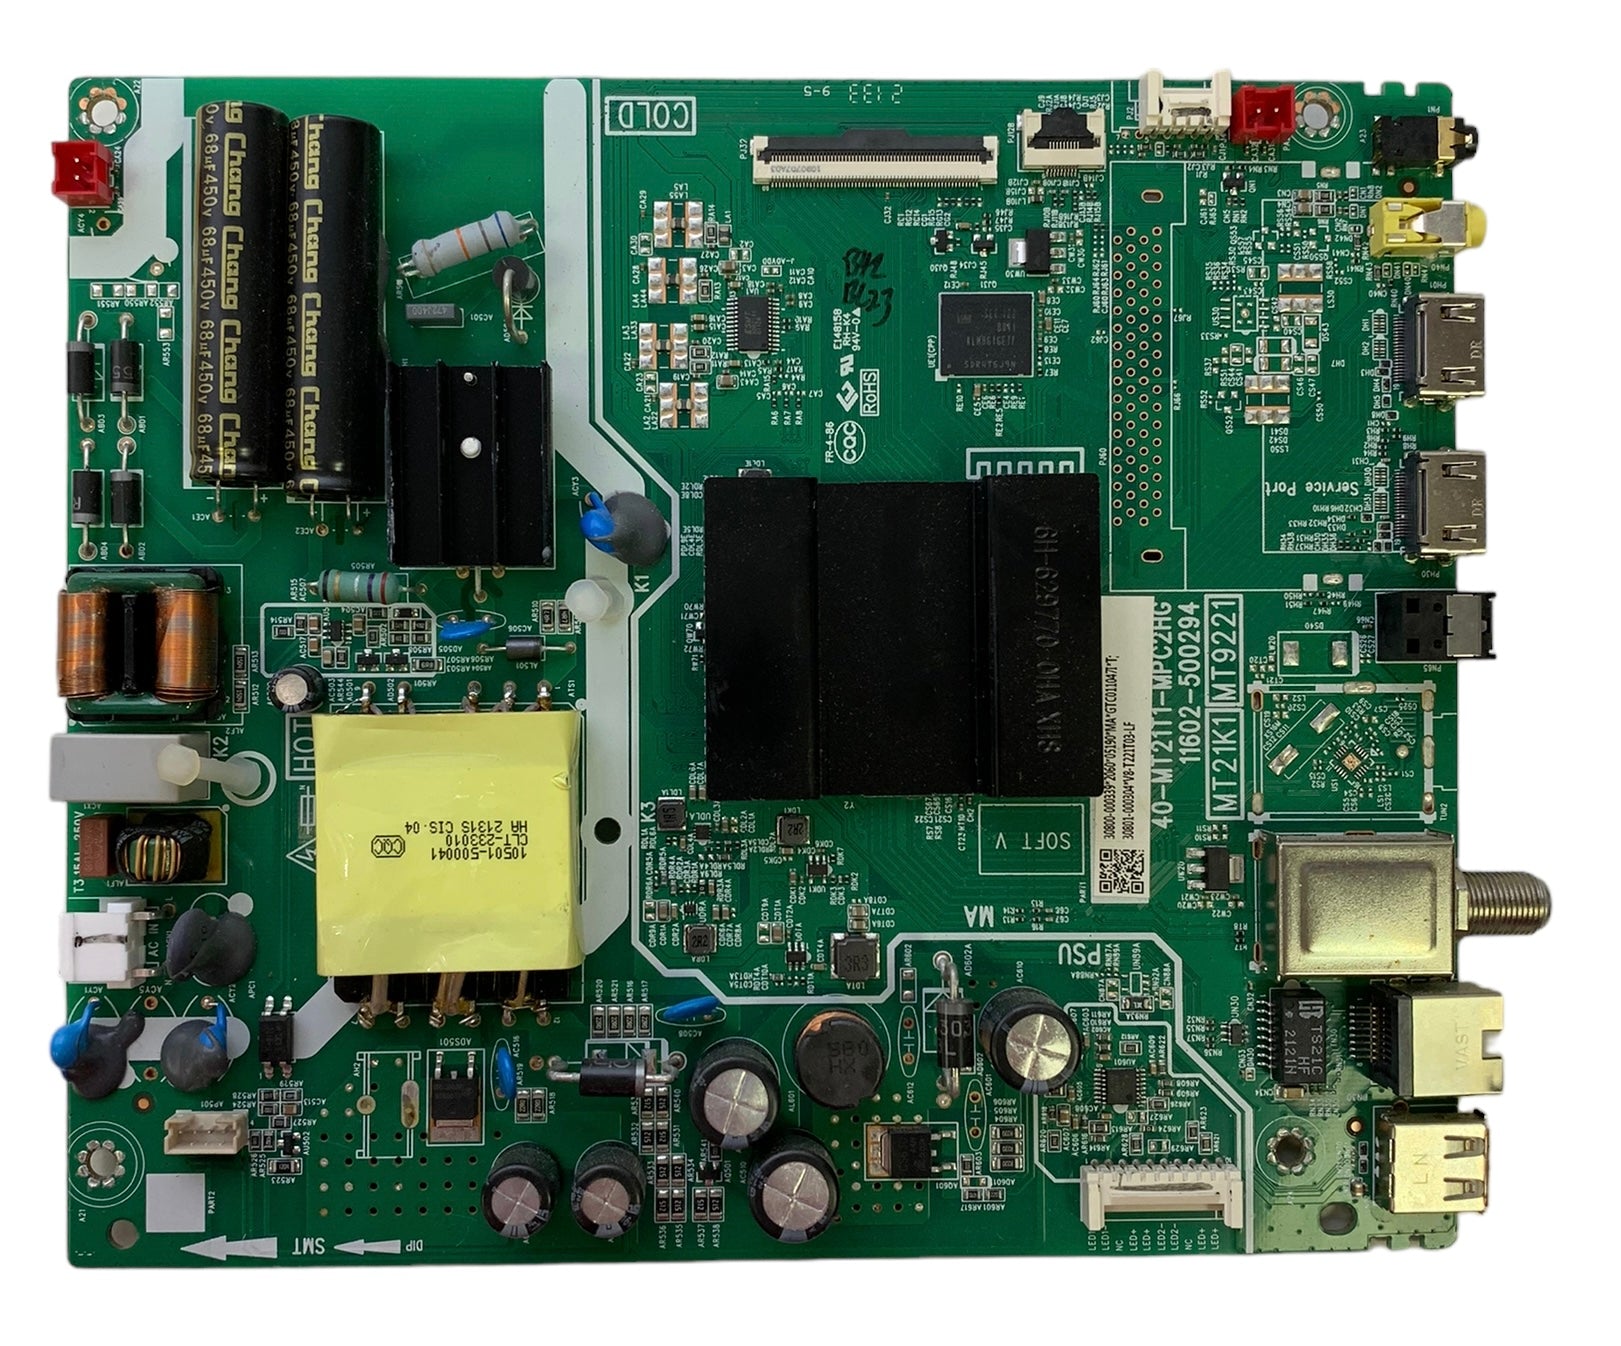 TCL 30800-000339 Main Board for 43S334